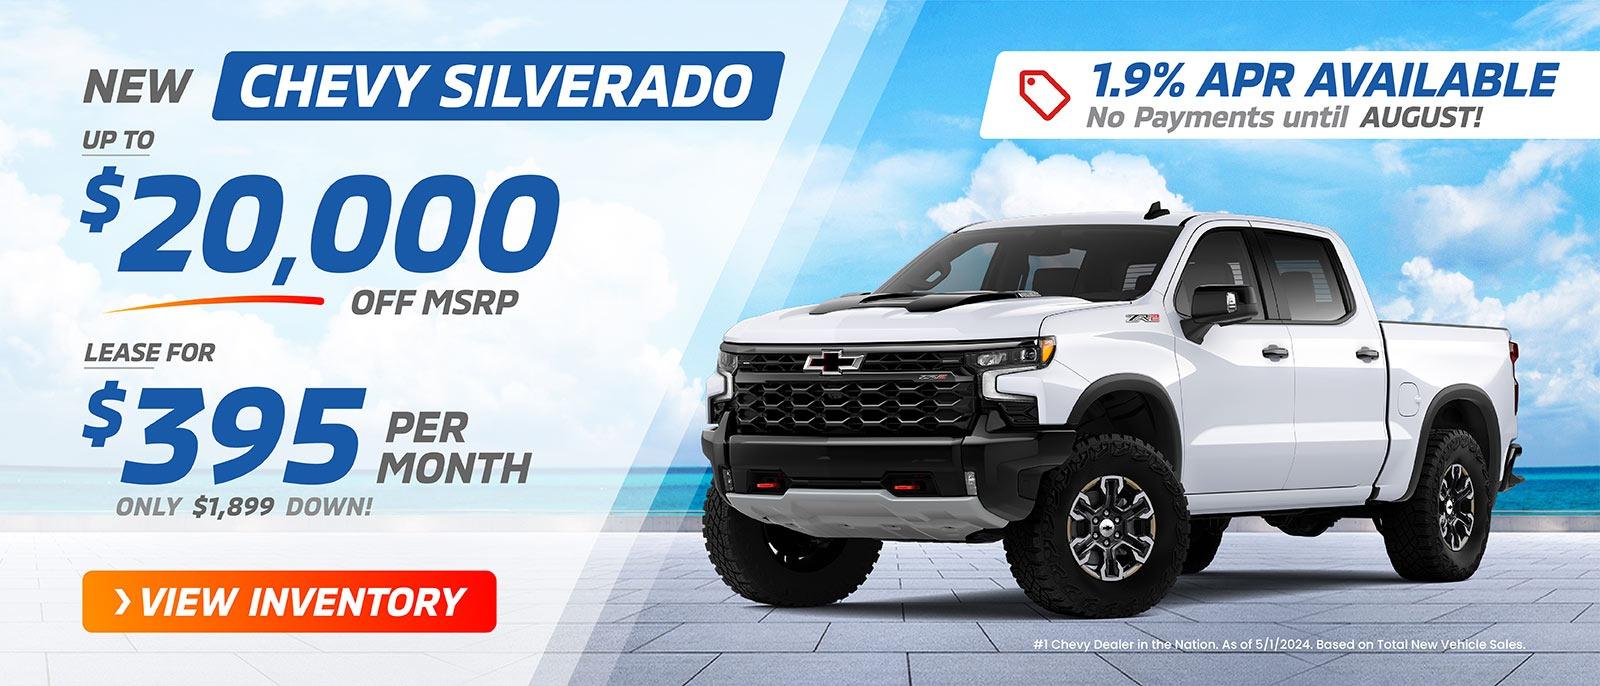 New Chevy Silverado
UP TO $20,000 OFF MSRP
OR $395 per month w/ $1899 down